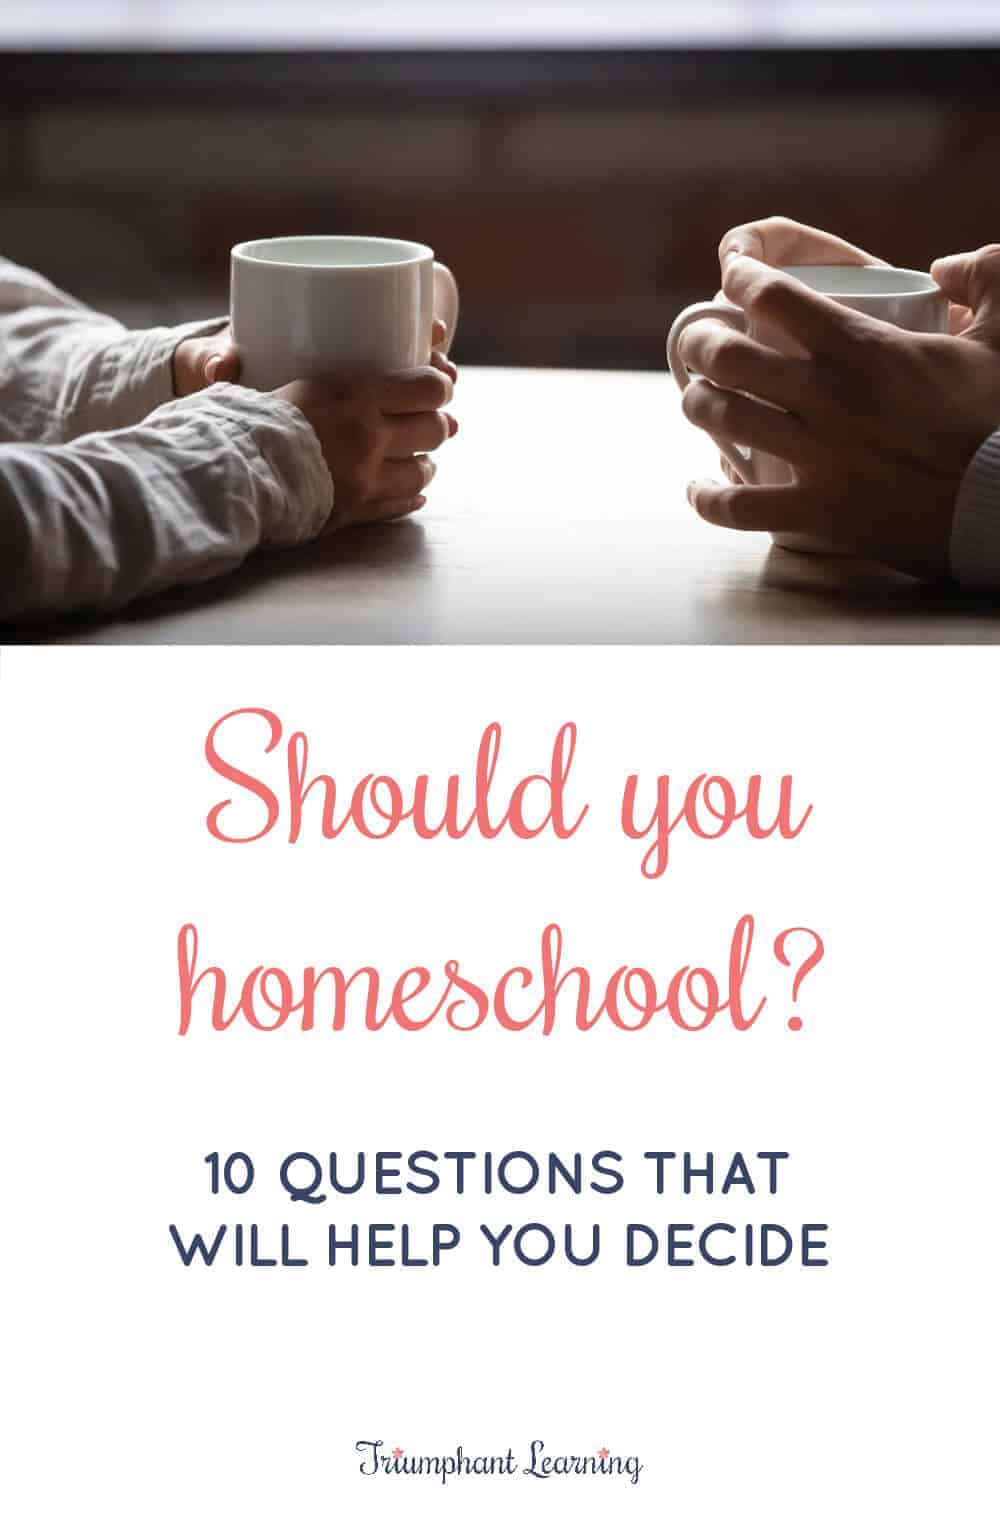 "Should I homeschool?" is a question many parents struggle to answer. There's no one right answer, but these 10 questions will help you decide if homeschooling would be a good fit for your family. via @TriLearning